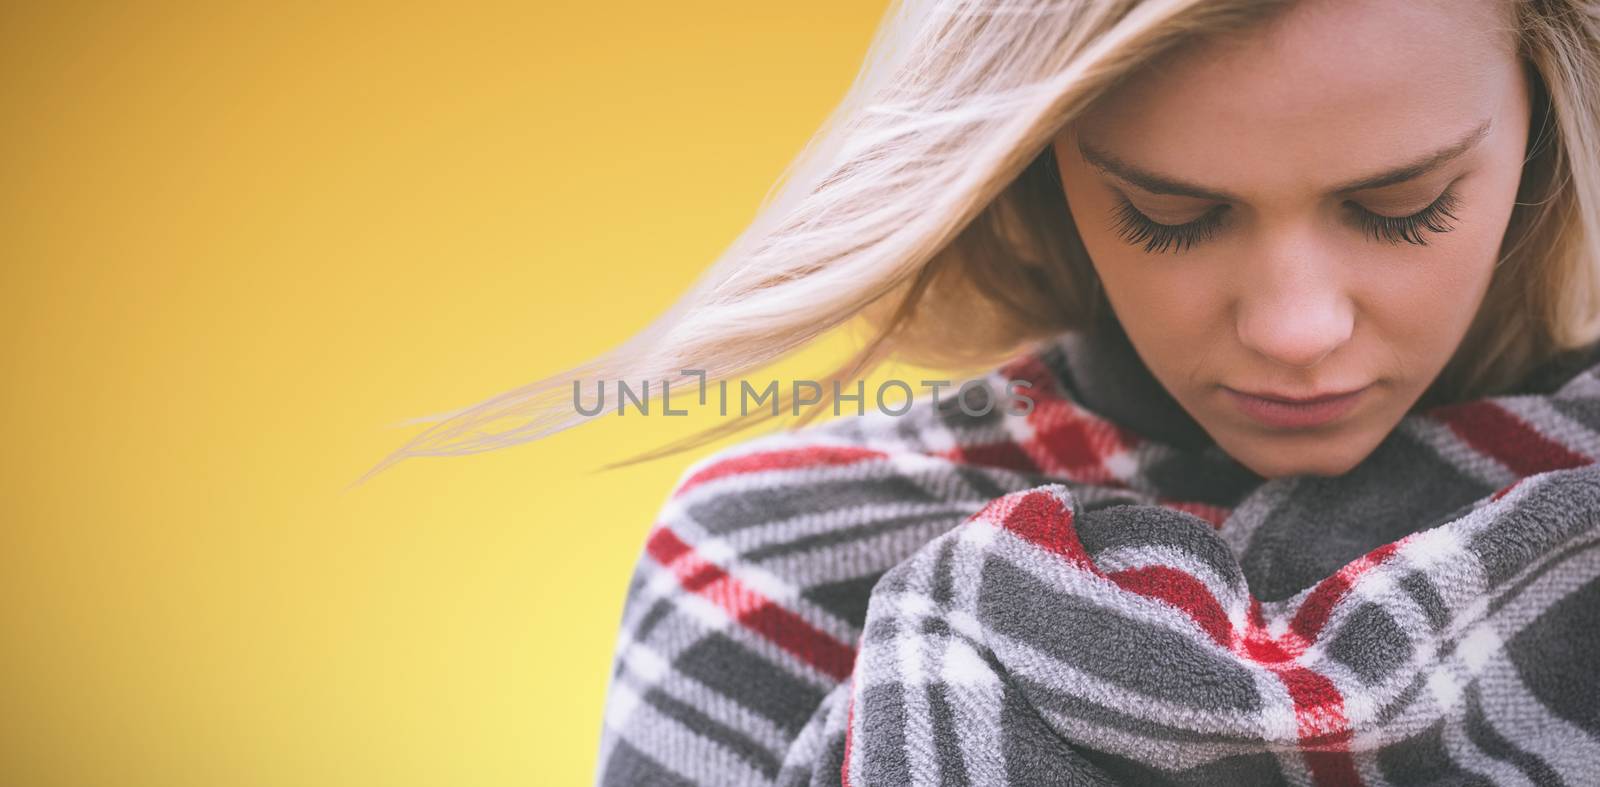 Composite image of close up of a woman wraped in a blanket by Wavebreakmedia